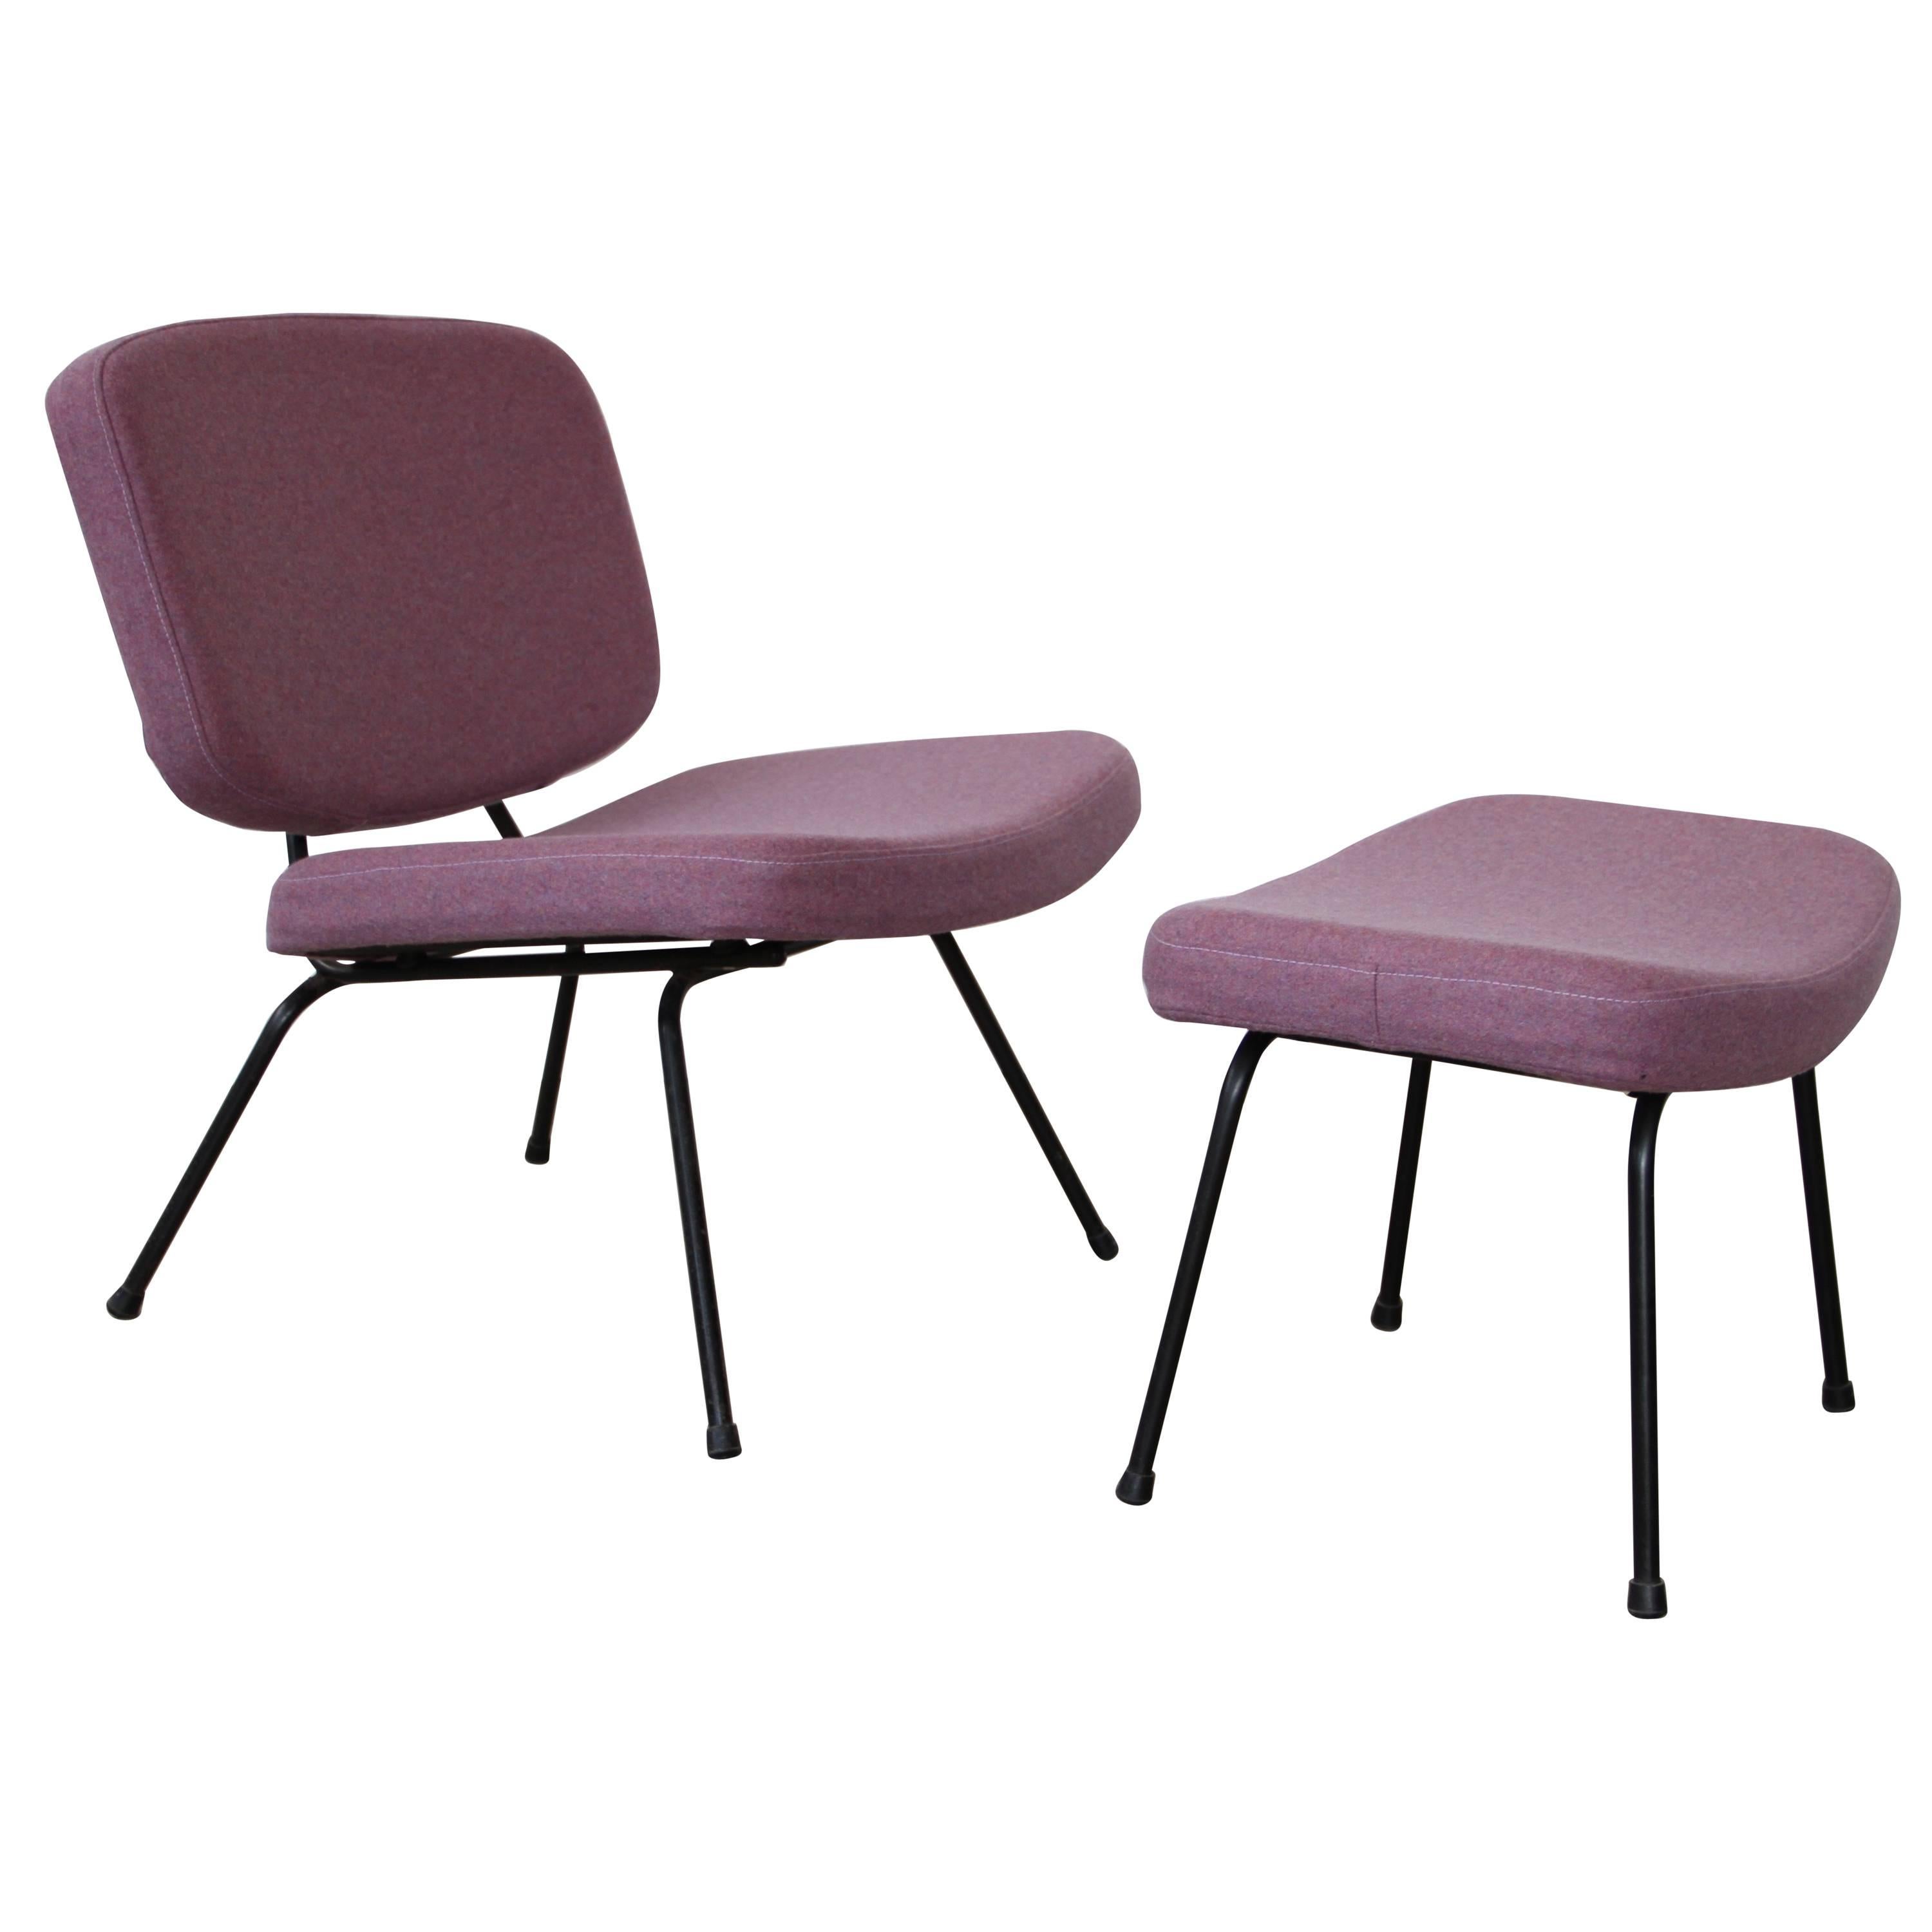 This complete set include two lows chairs CM190 and two foot stool CM190P
they need to be restaure, so you can choose your fabric 

This price include tonus4 Kvadrat fabric.
 